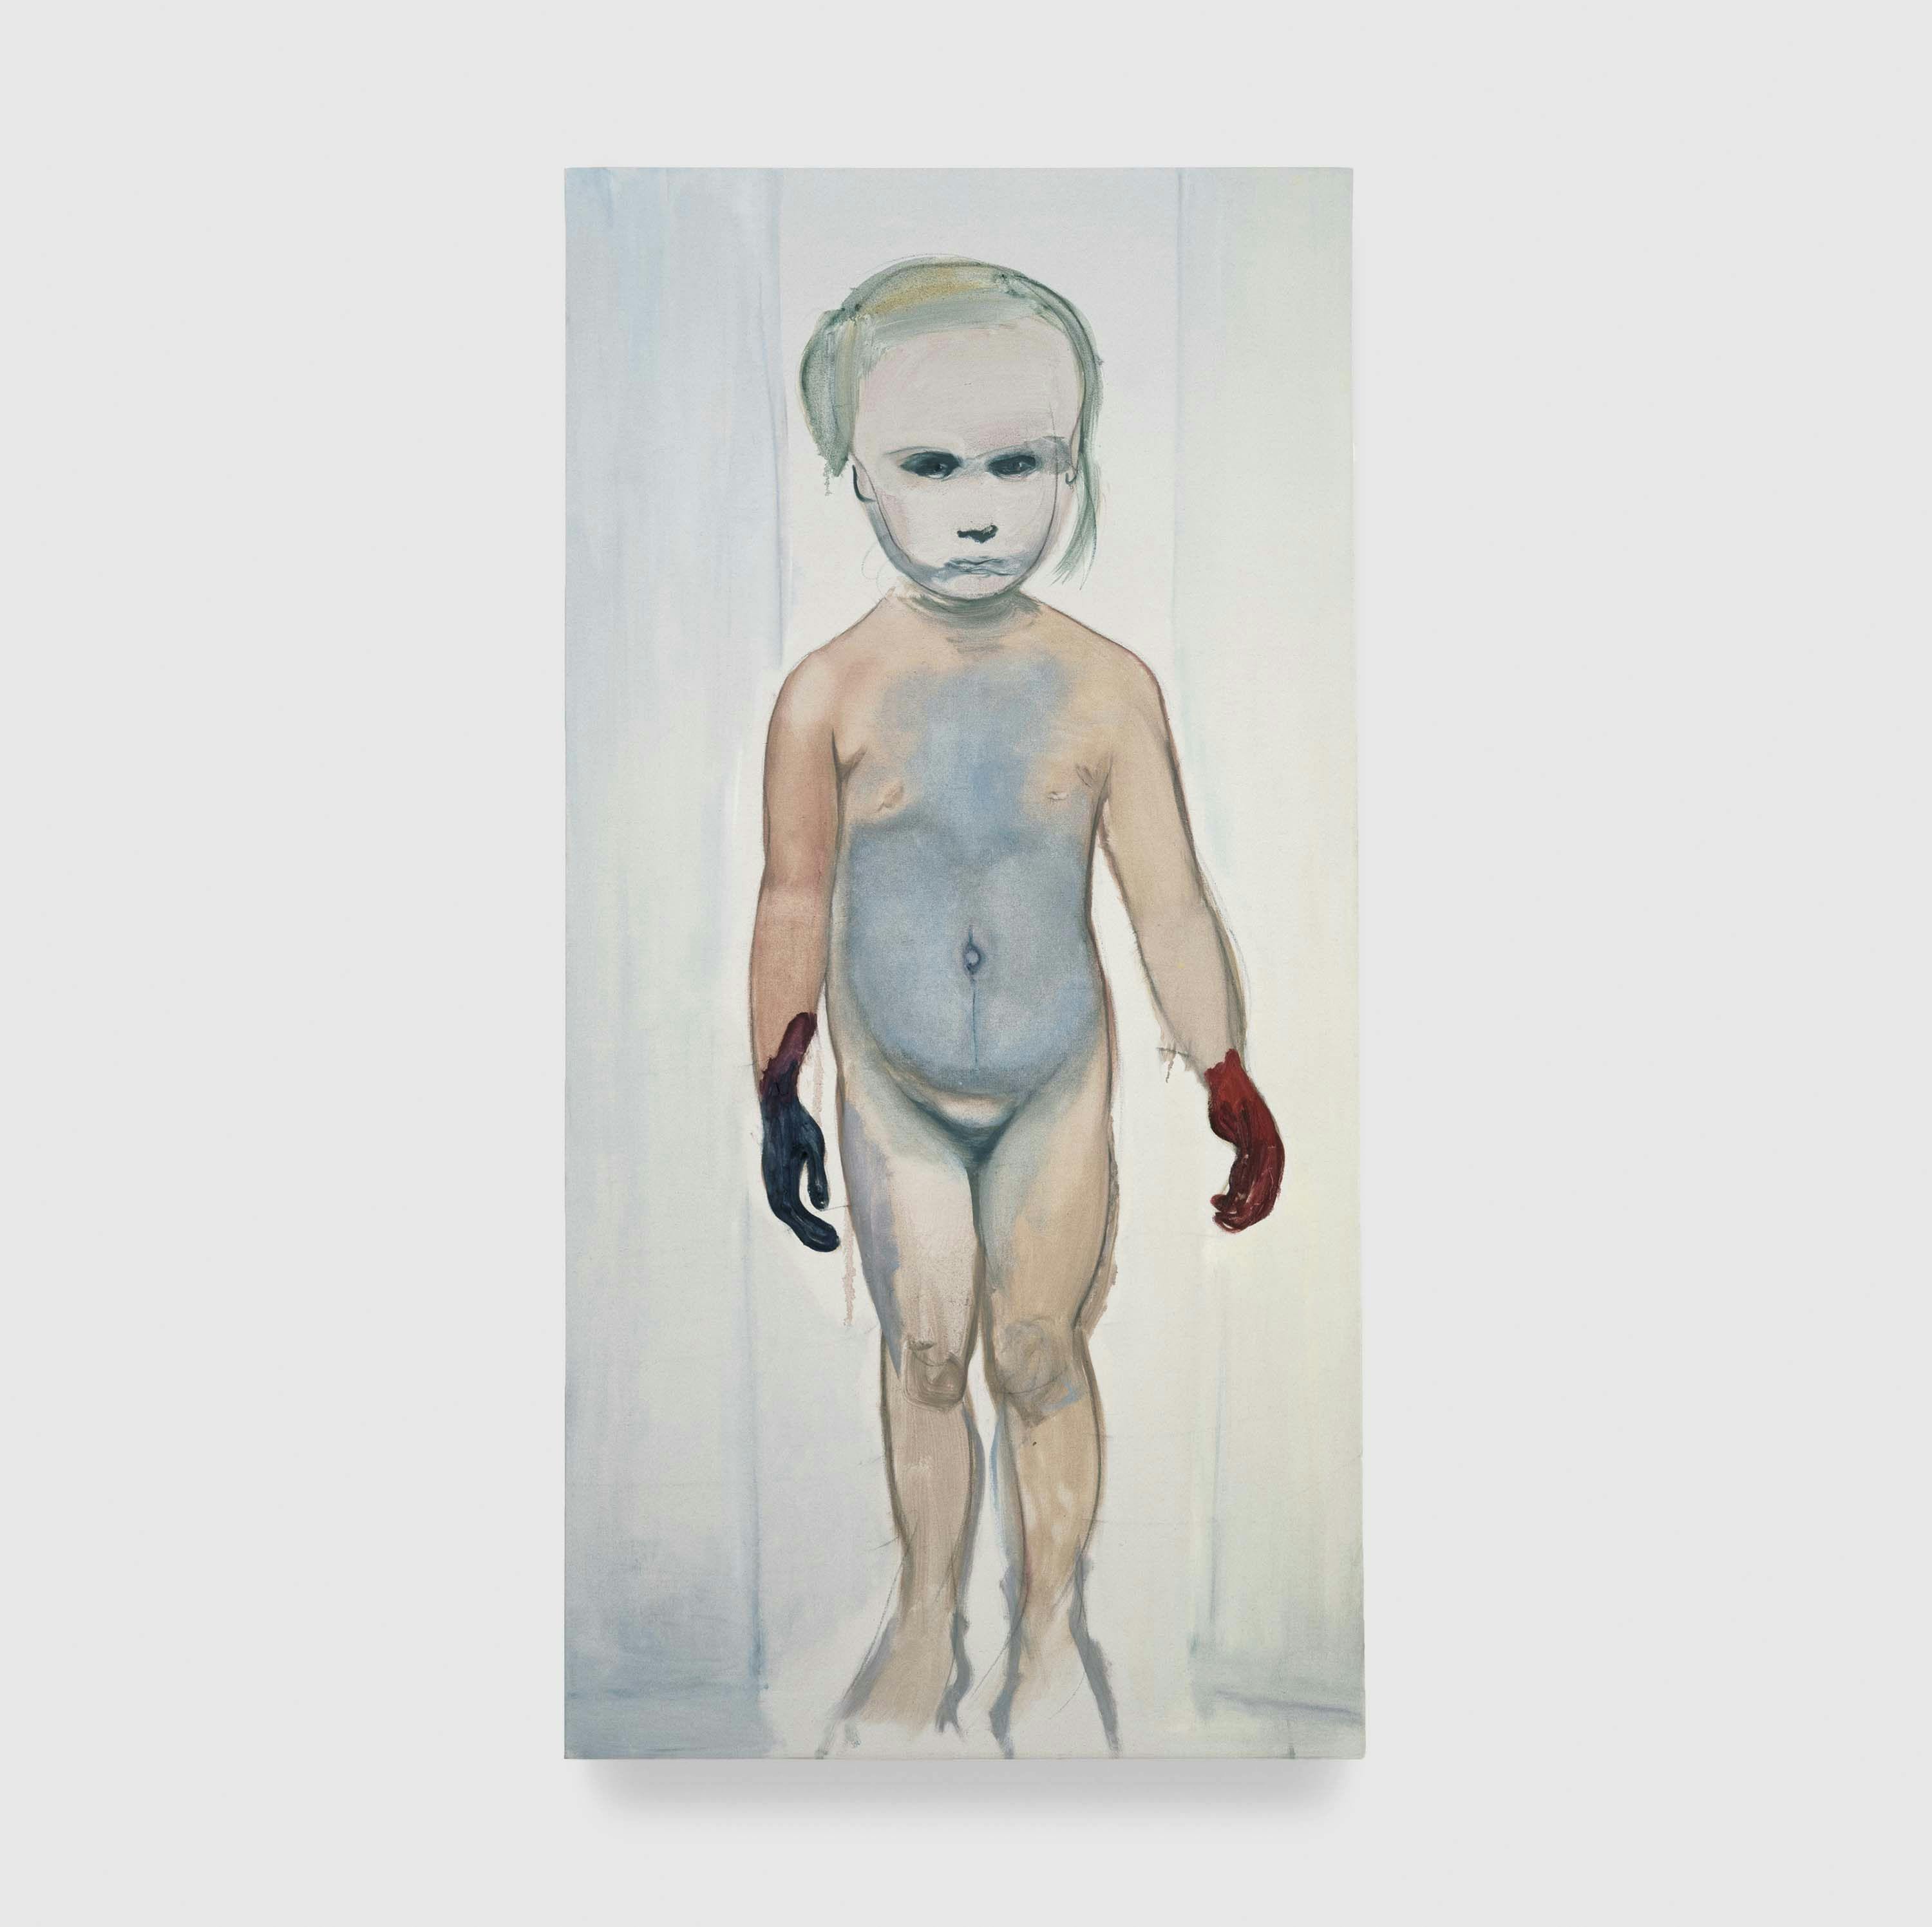 A painting by Marlene Dumas, titled The Painter, dated 1994.